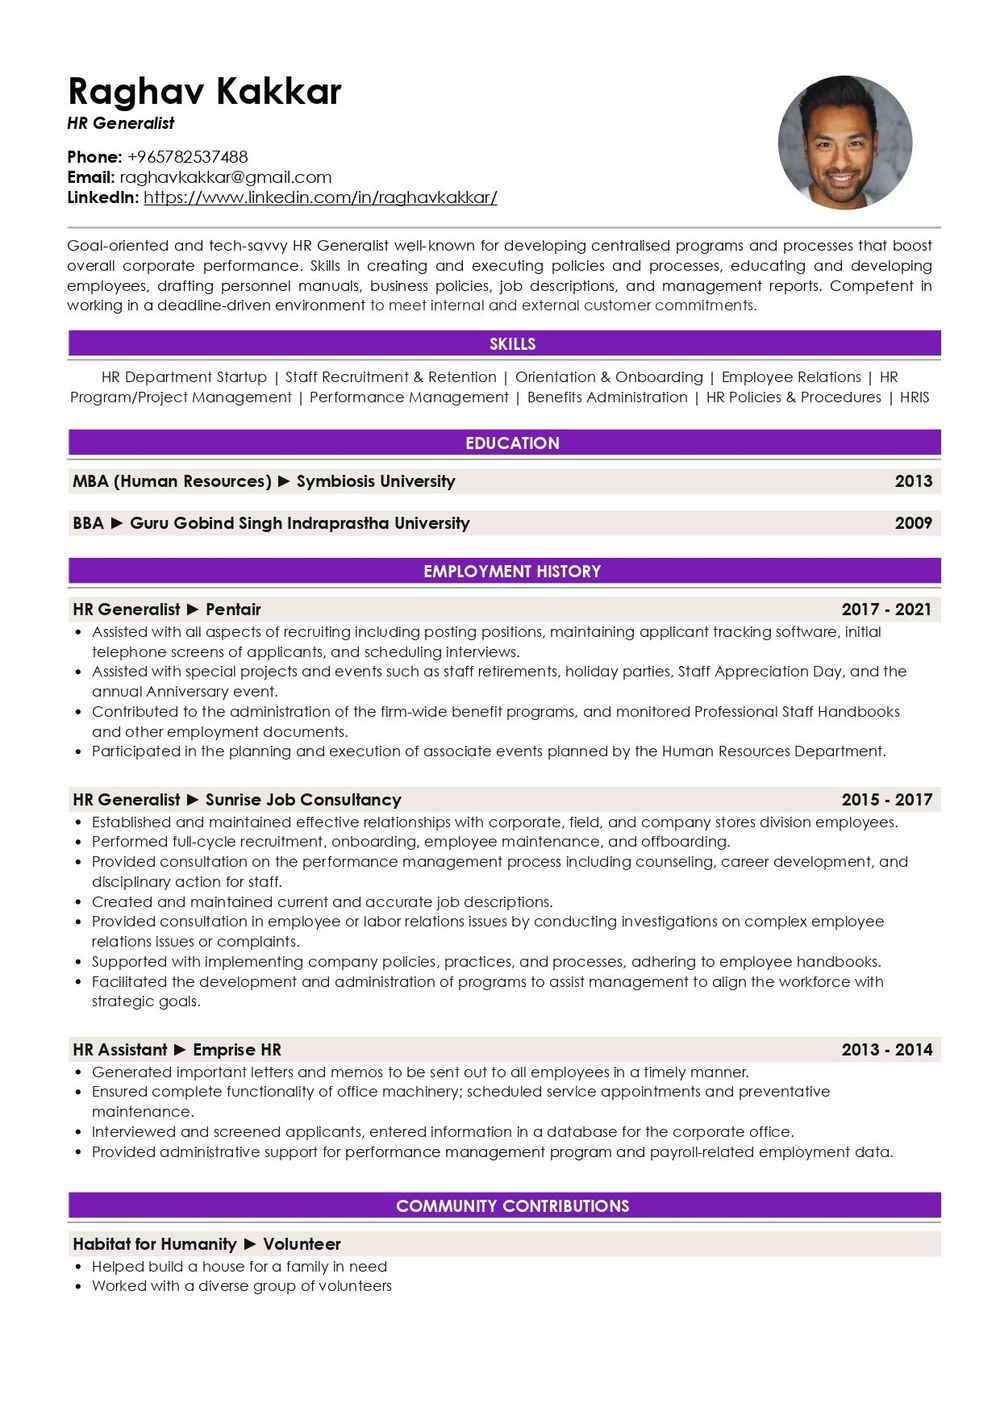 resume format for hr executive fresher